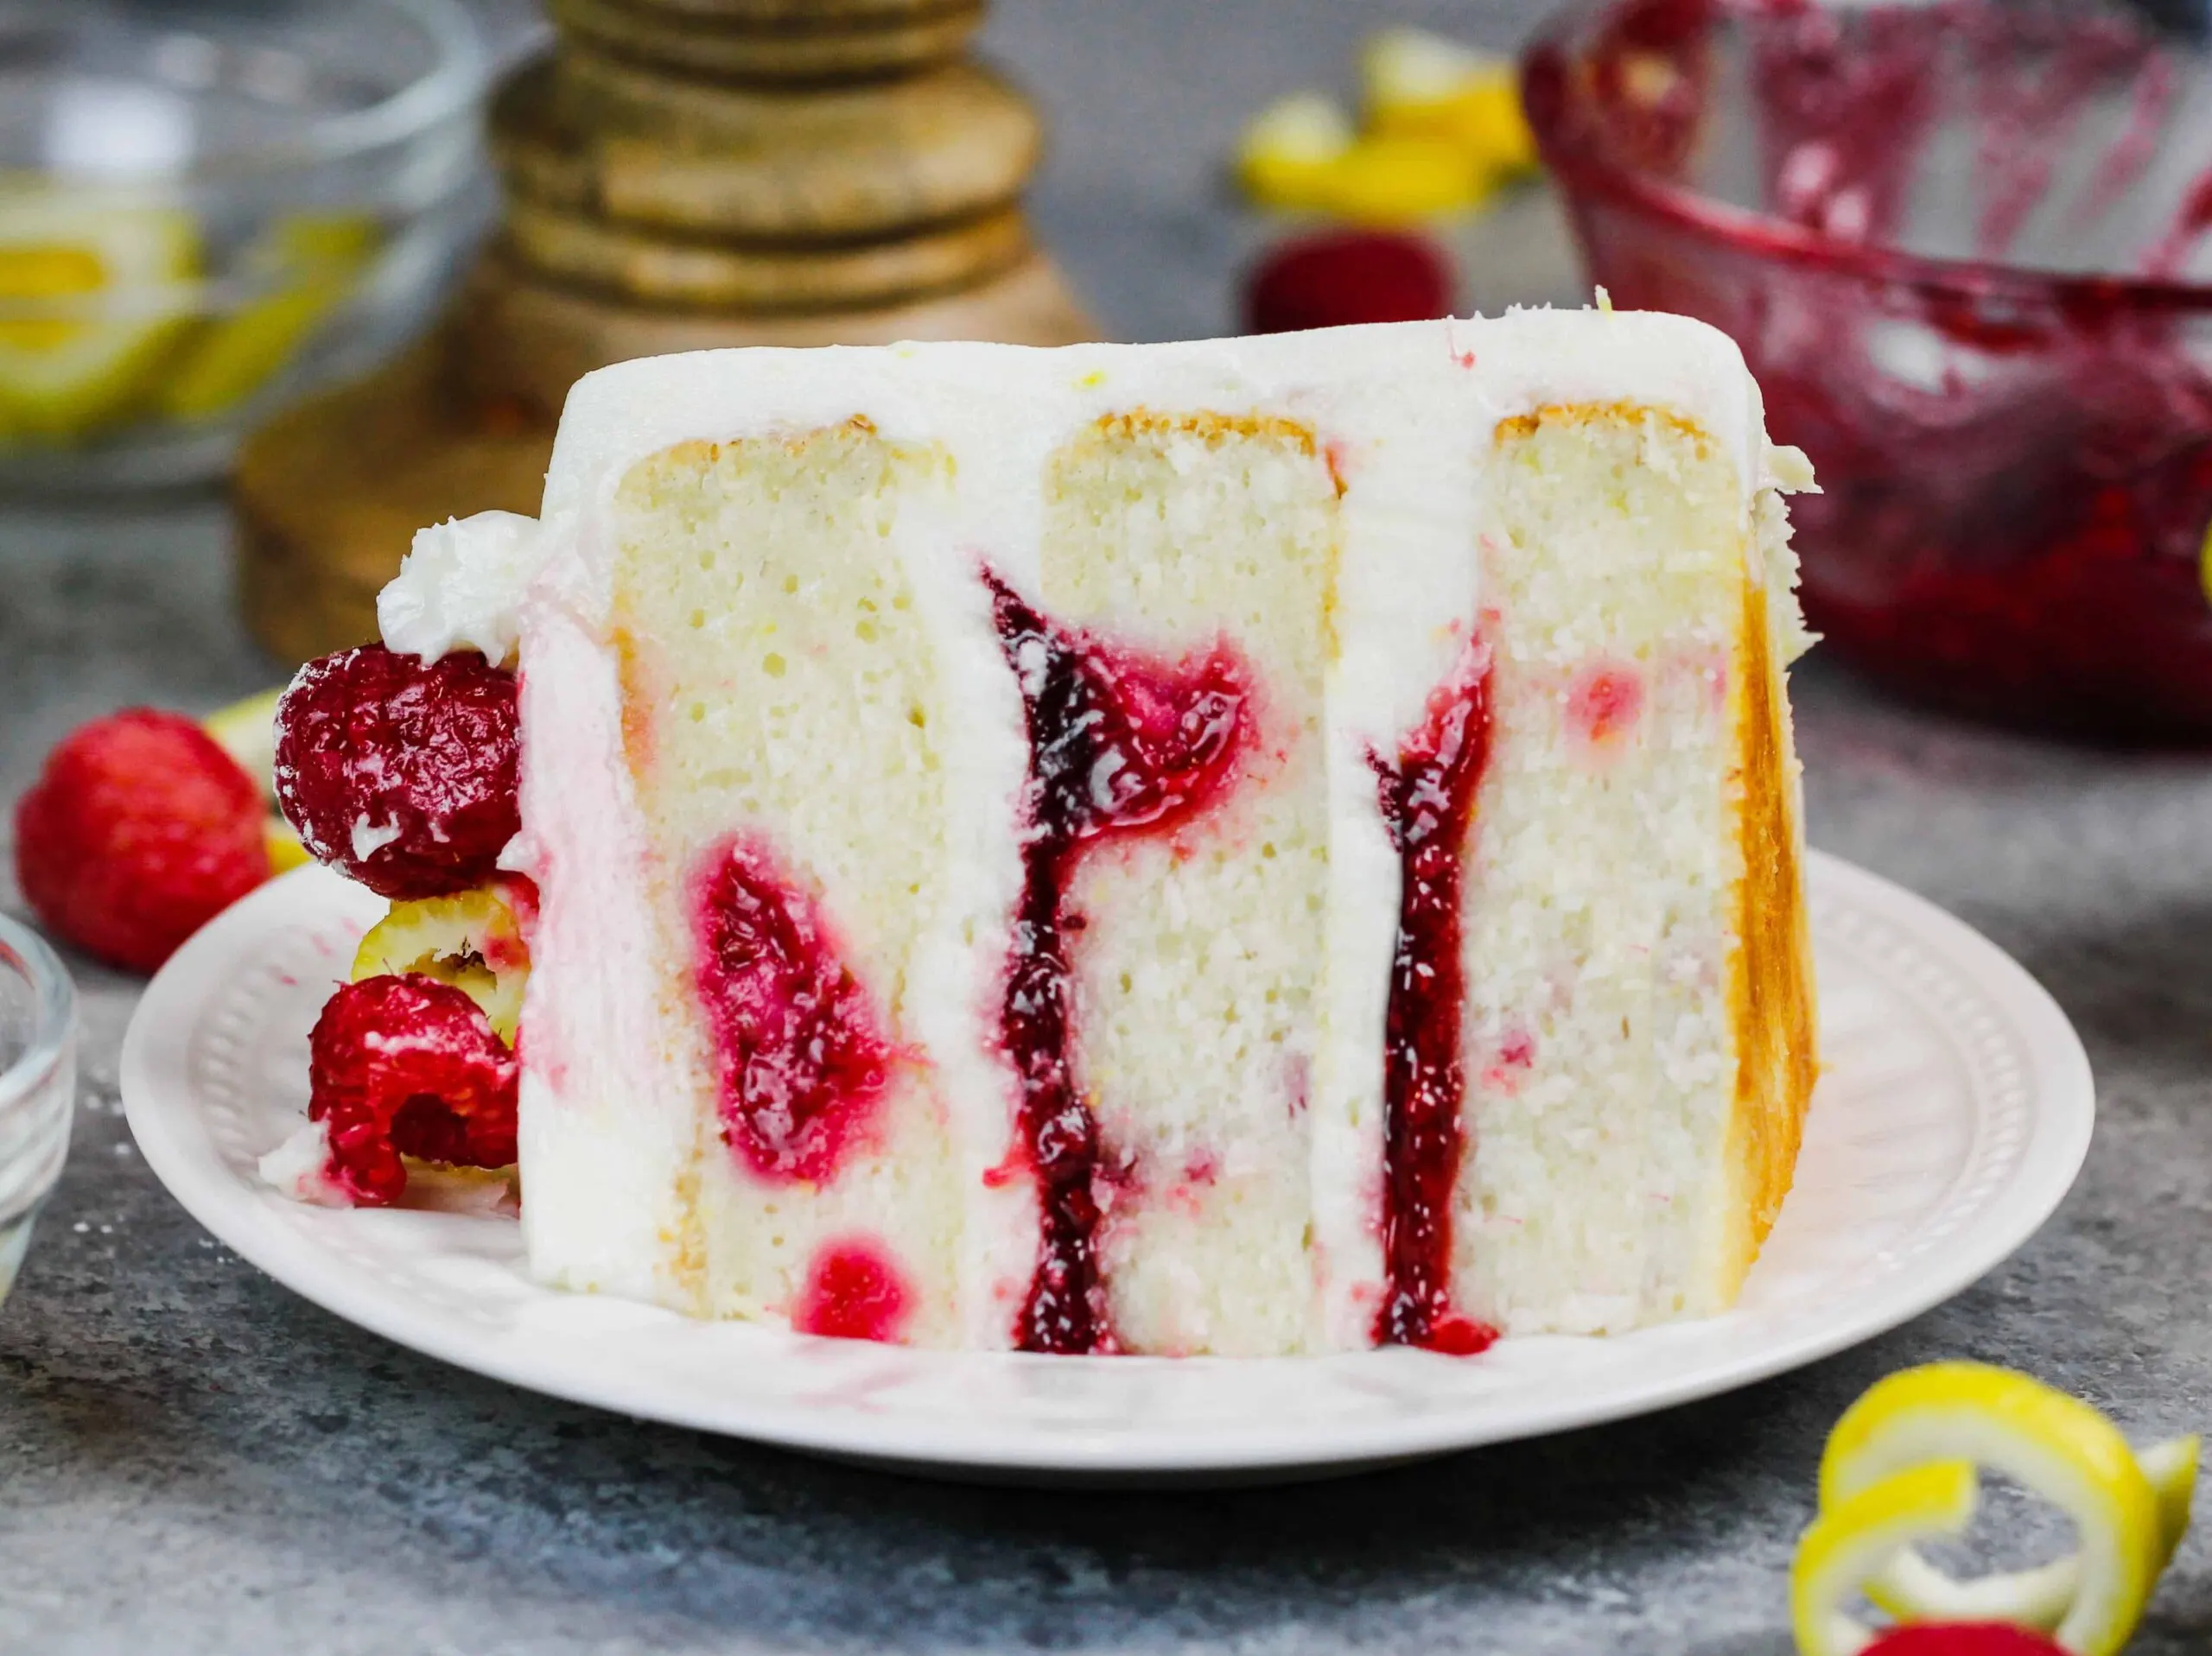 image of a slice of lemon rapsberry cake on a plate, showing it's raspberry filling and lemon cream cheese frosting